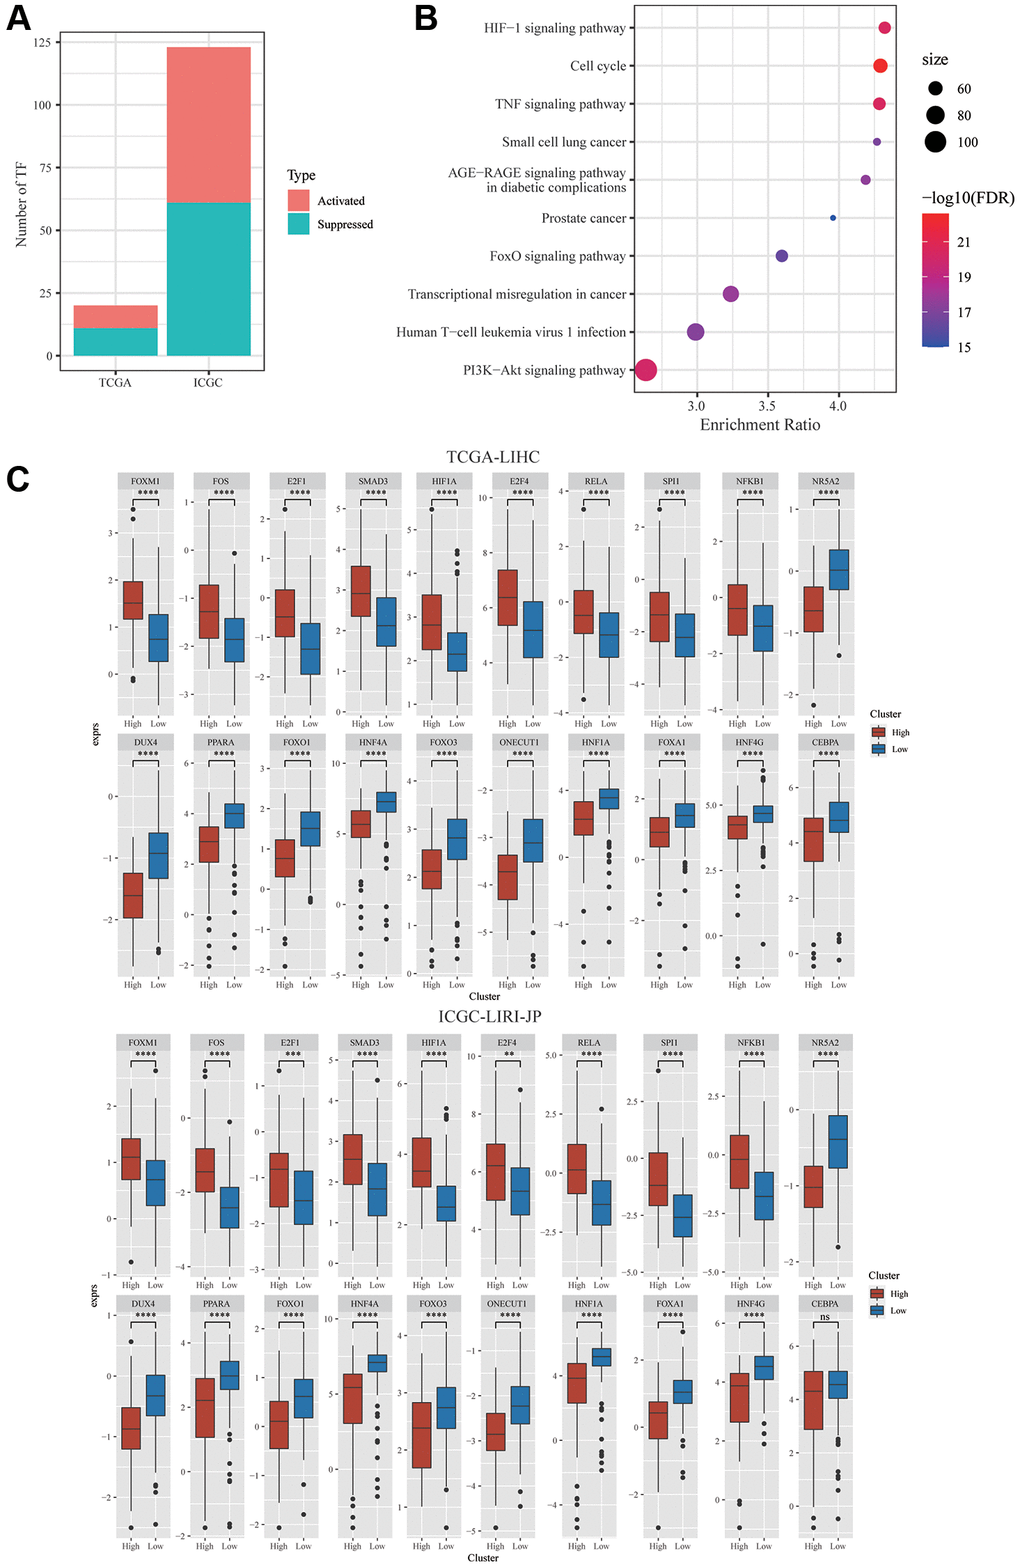 Integrative Analysis of mTORC1-related genes. (A) Distribution of the activated and suppressed TFs in C2 in comparison with C1 in TCGA-LIHC and ICGC-LIRI-JP cohort. (B) The findings of the functional enrichment analysis of TFs upregulated in the C1 subtype in TCGA-LIHC cohort. (C) The dysregulation in TF activity of the upregulated transcription factors in the TCGA-LIHC and ICGC-LIRI-JP cohort.